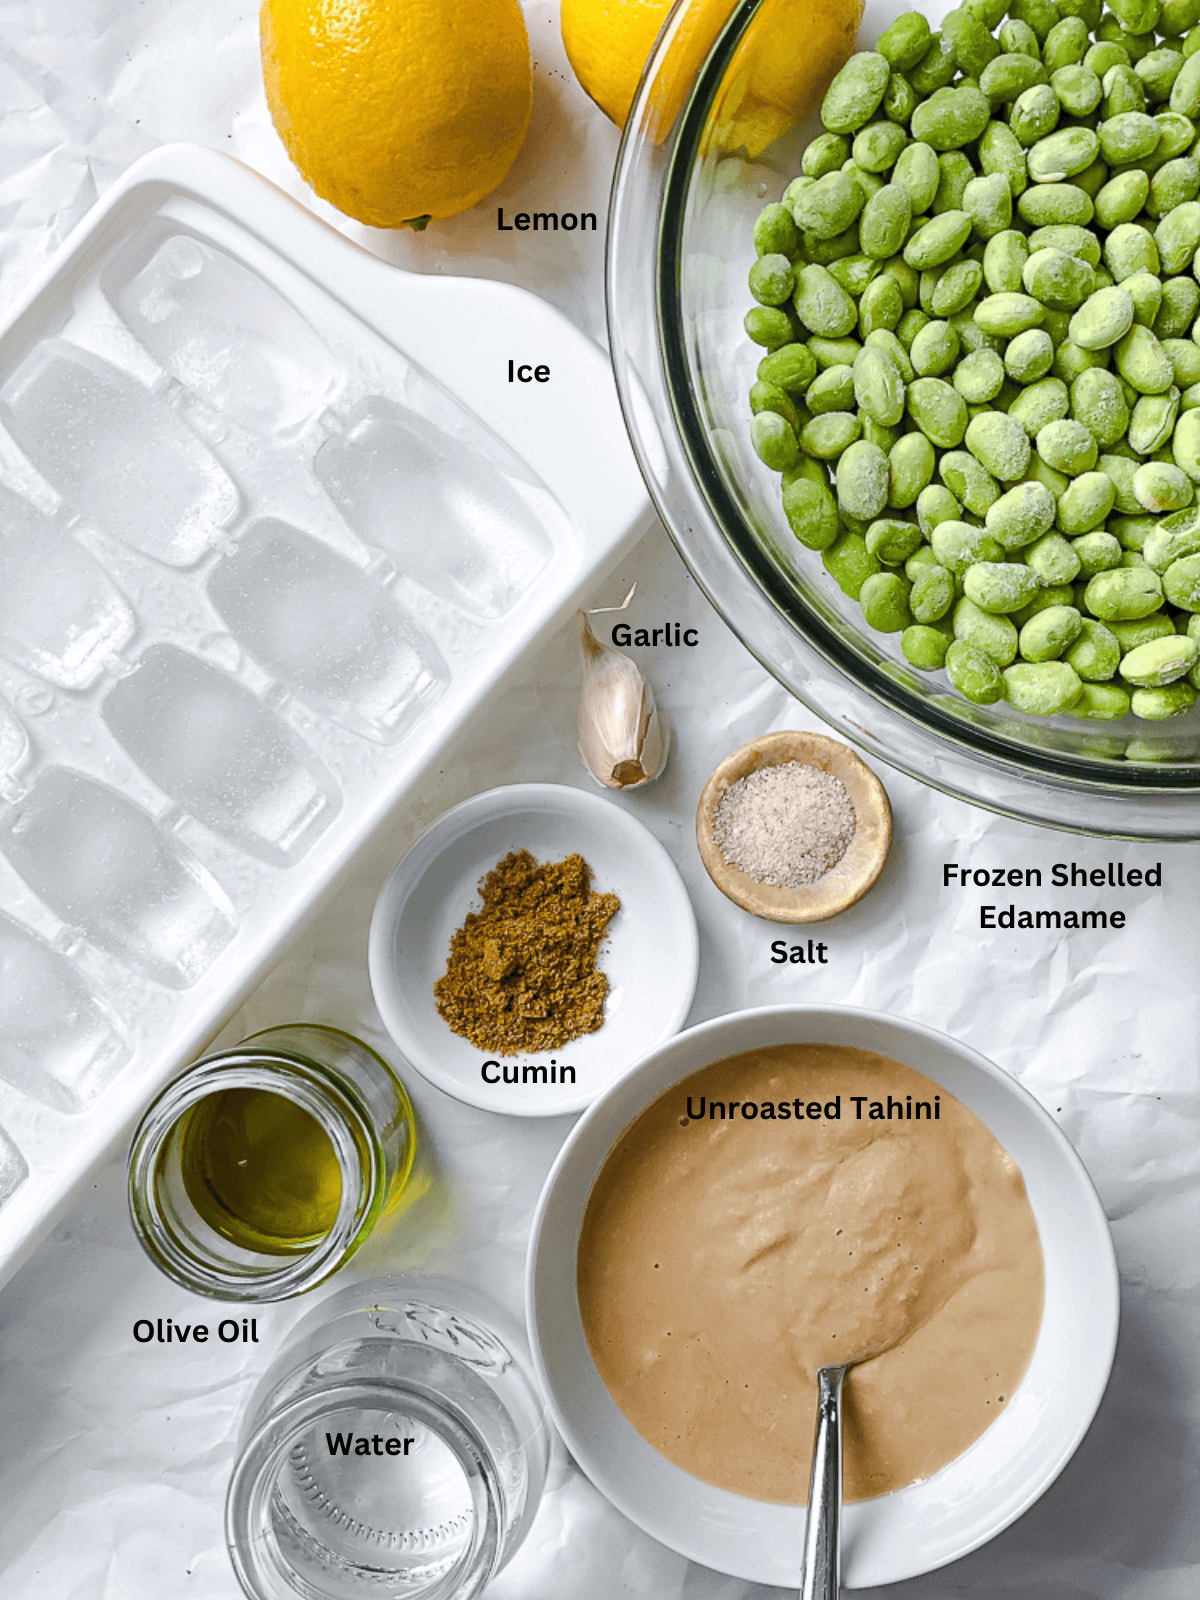 ingredients for Edamame Hummus measured out on a white surface